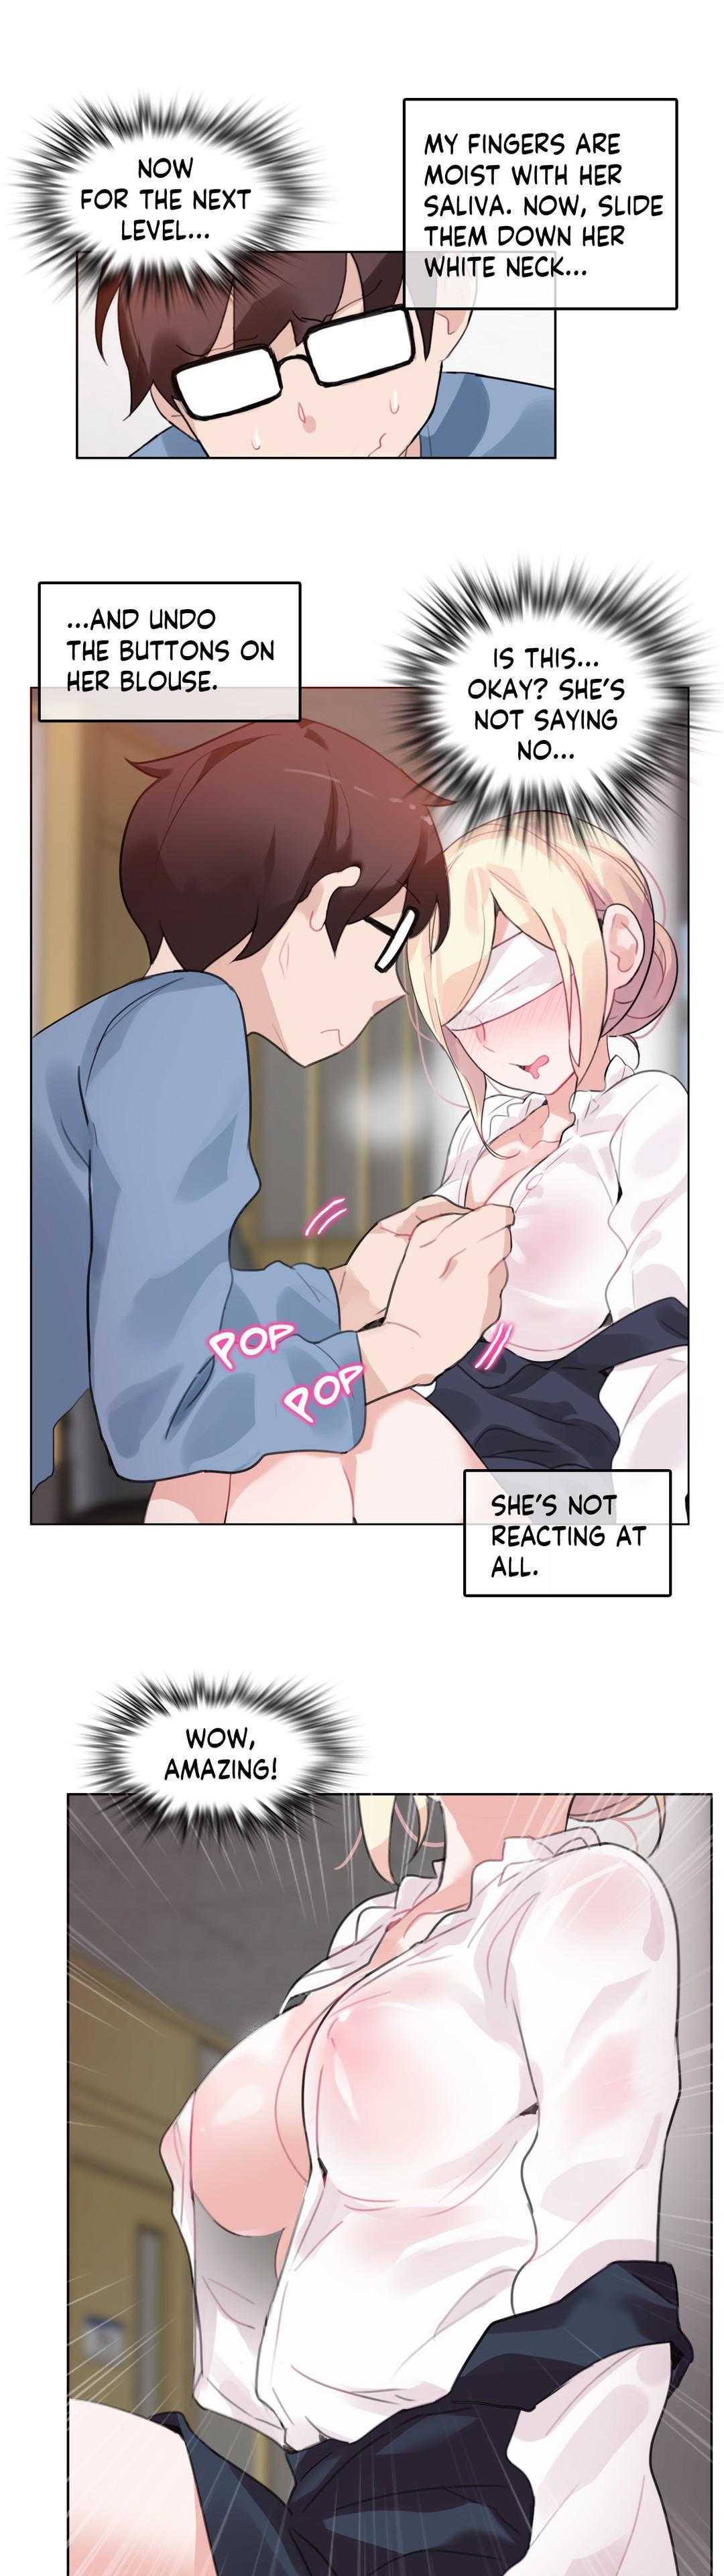 A Pervert's Daily Life Ch. 1-34 524